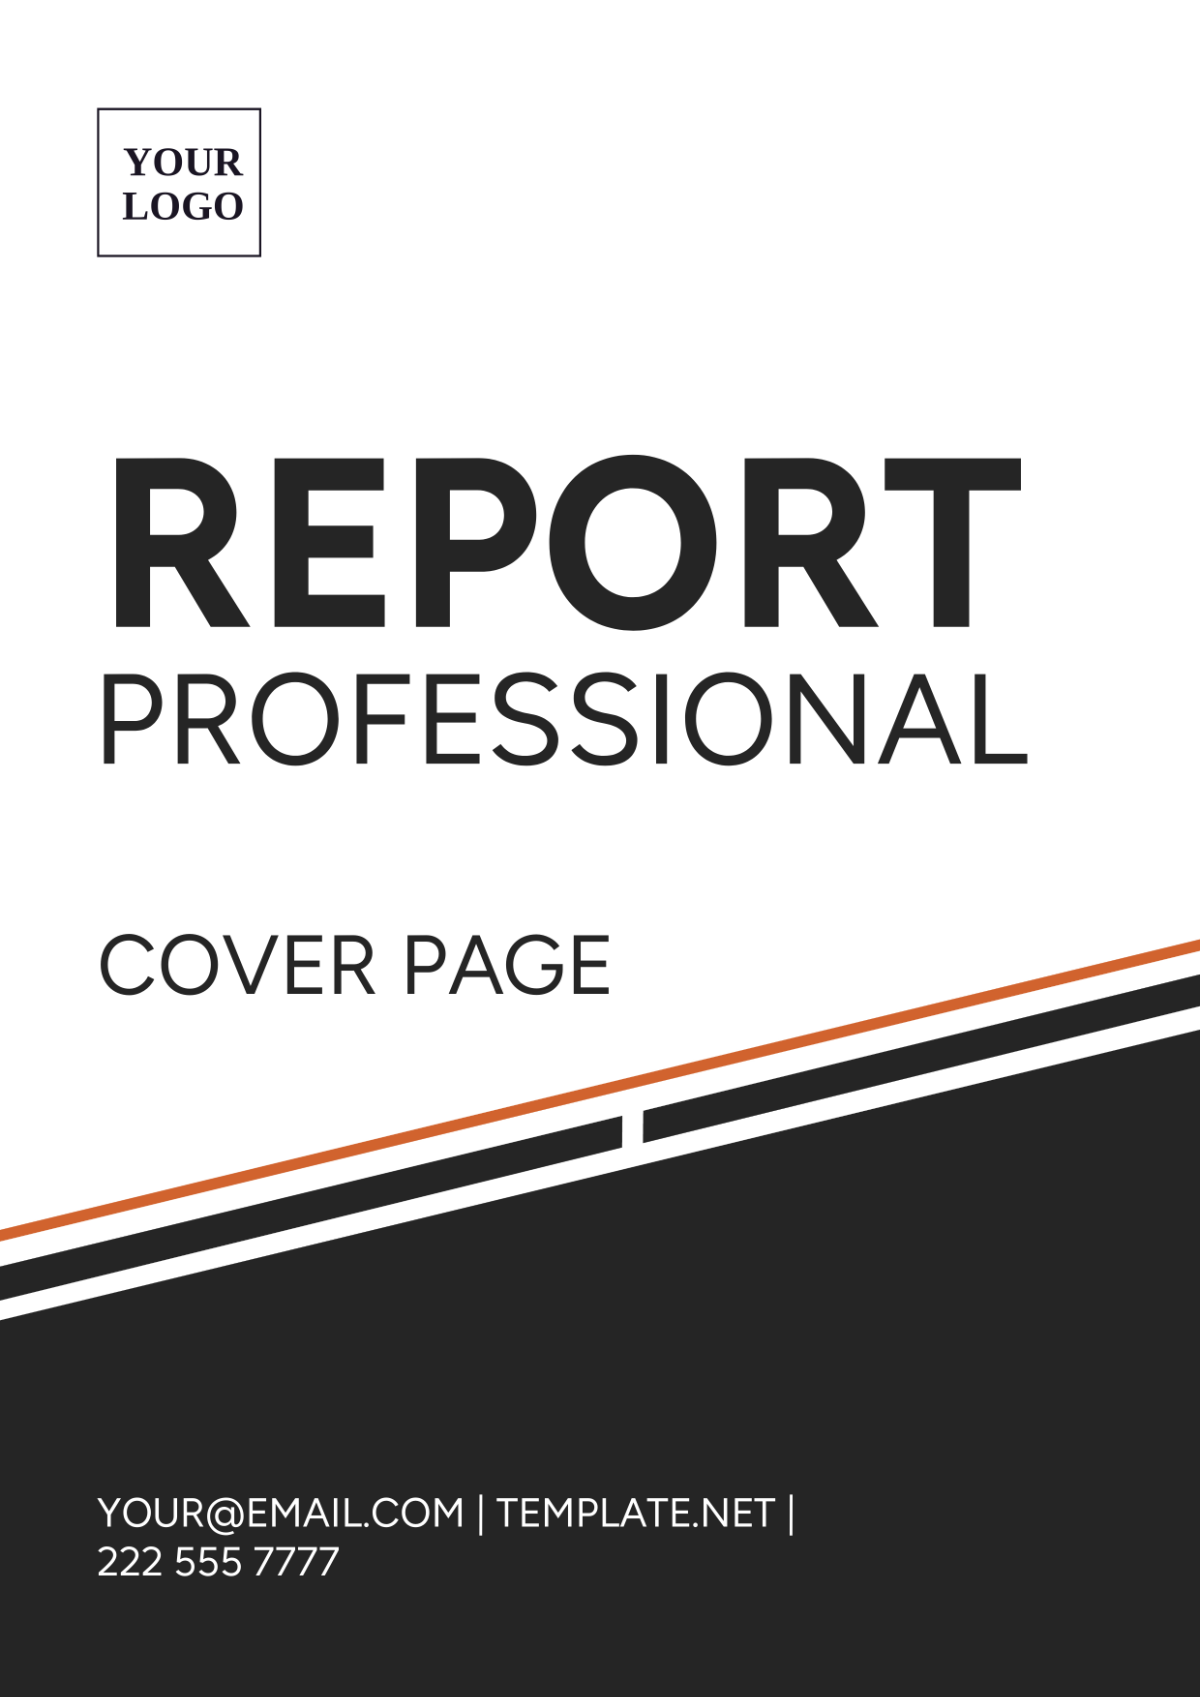 Report Professional Cover Page Template